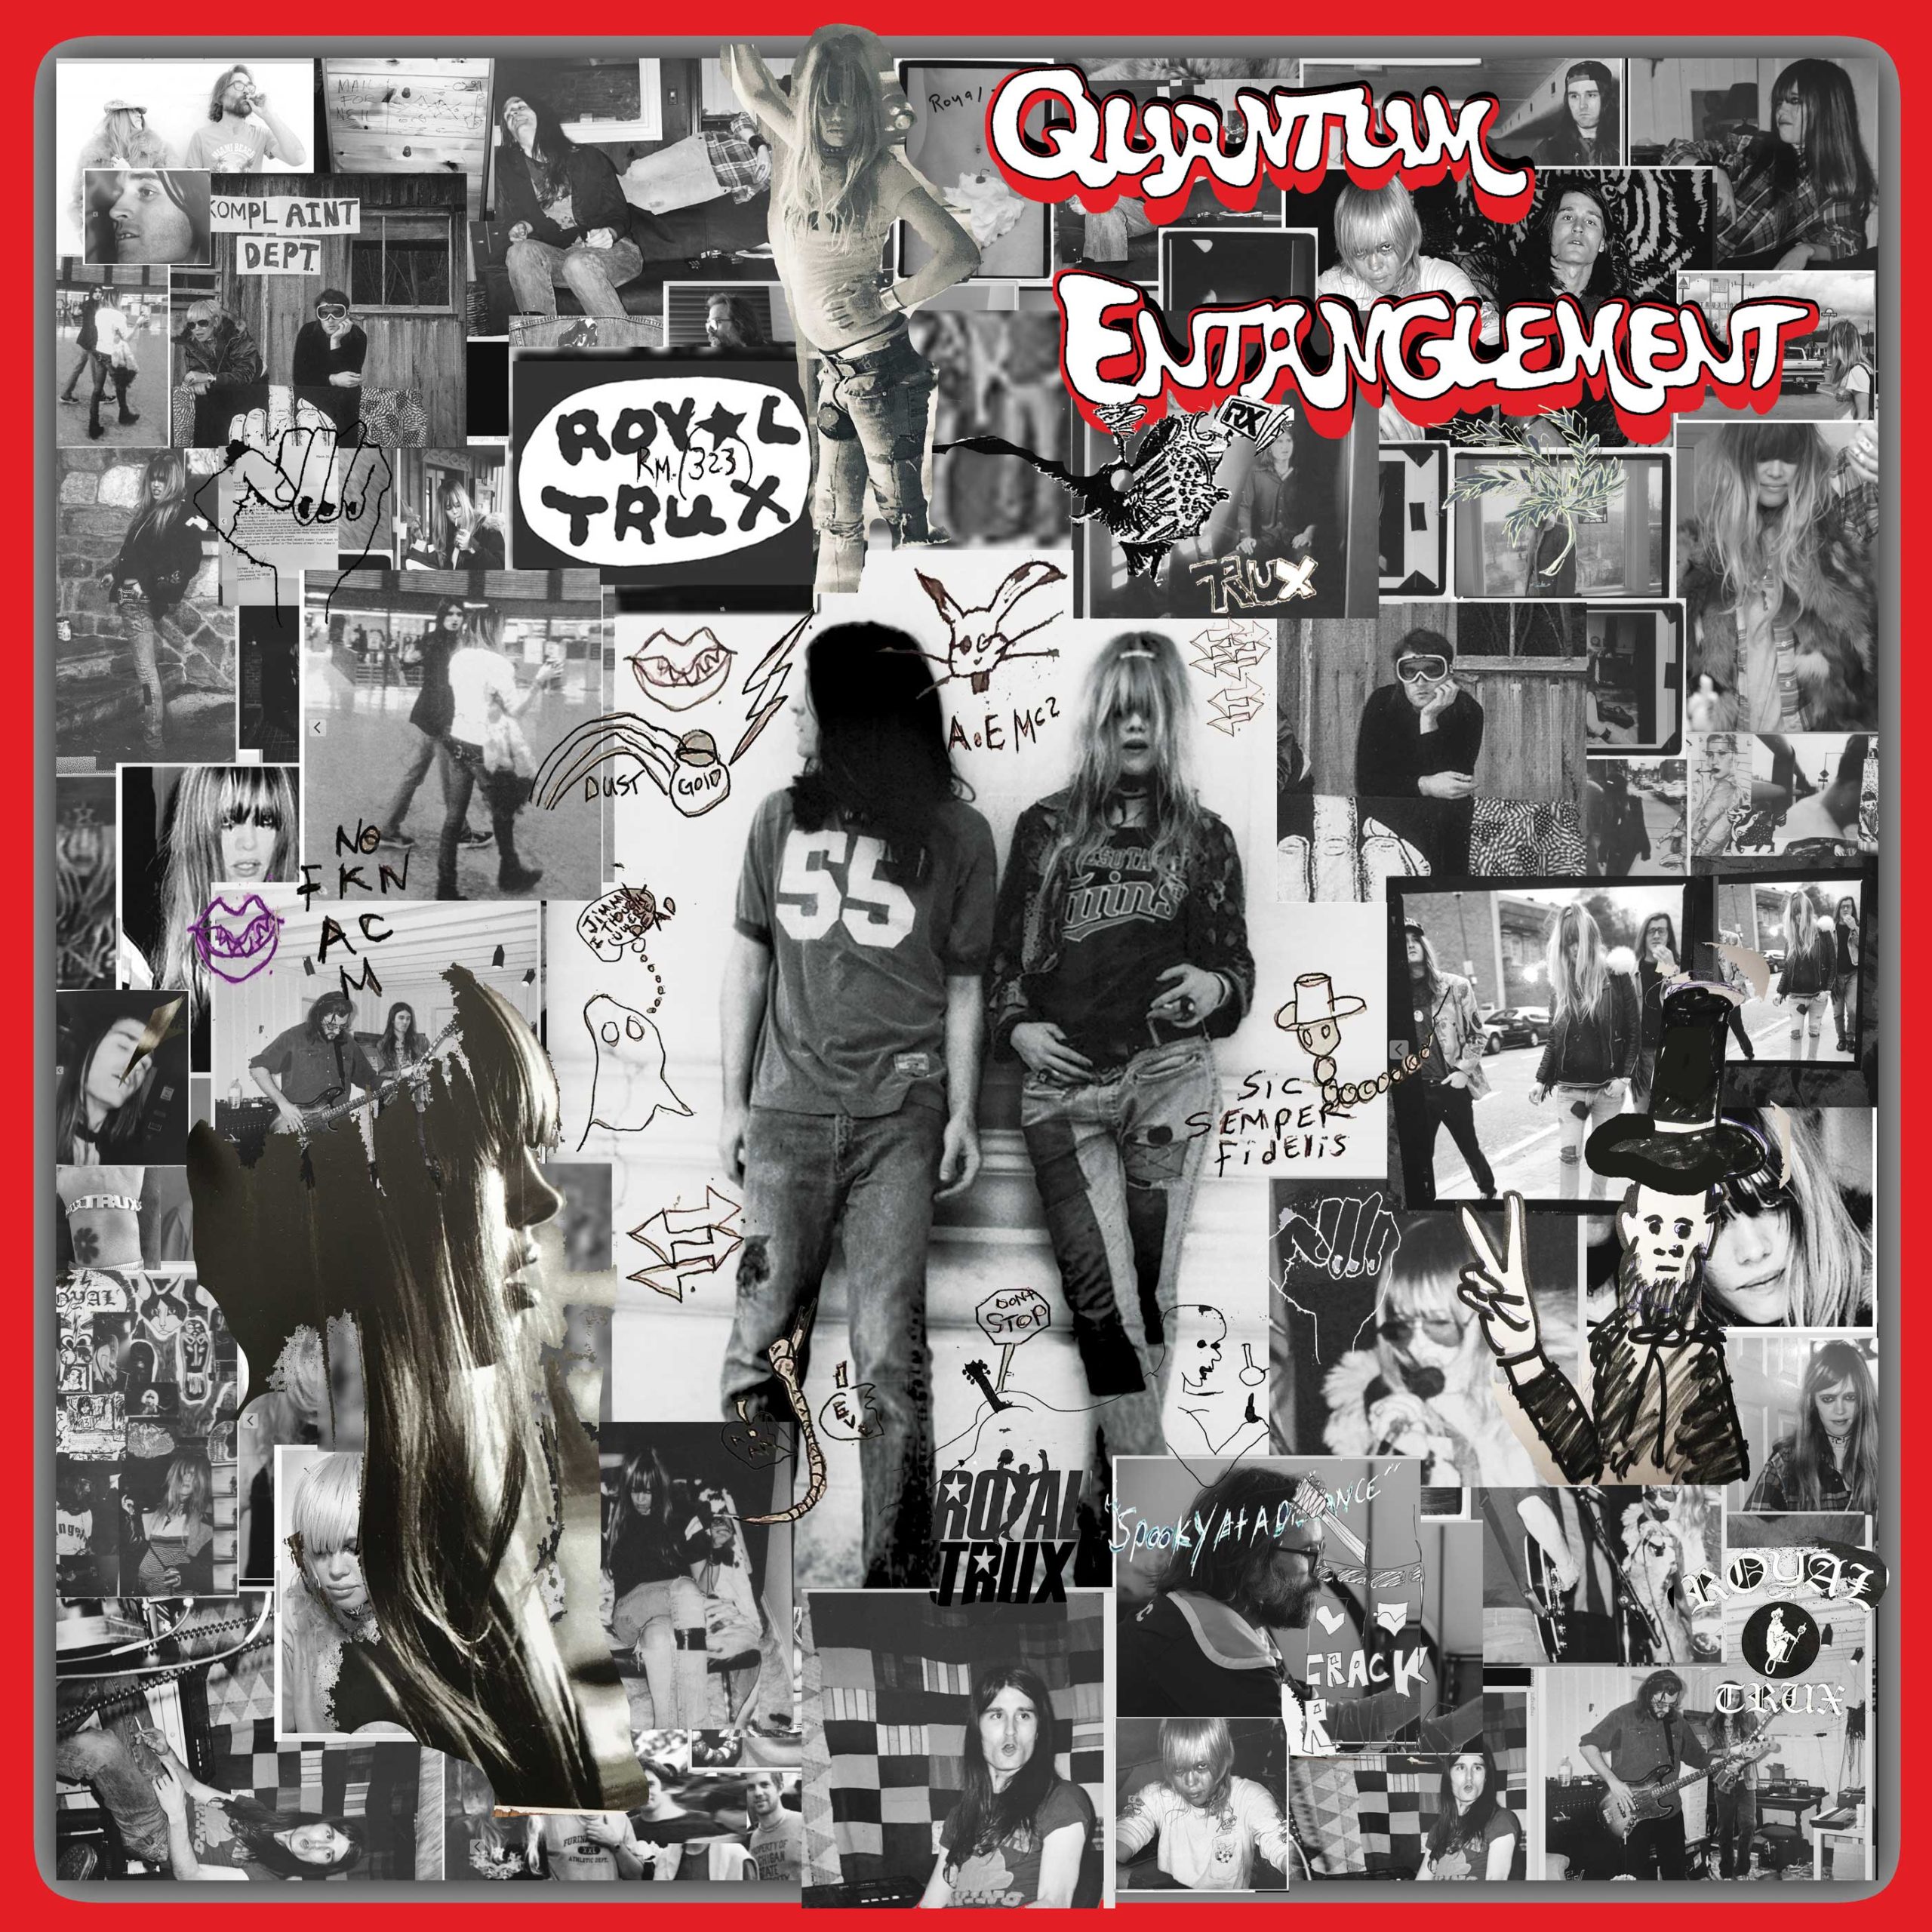 Royal Trux set to release 14-track career-spanning collection titled Quantum Entanglement for Record Store Day Black Friday